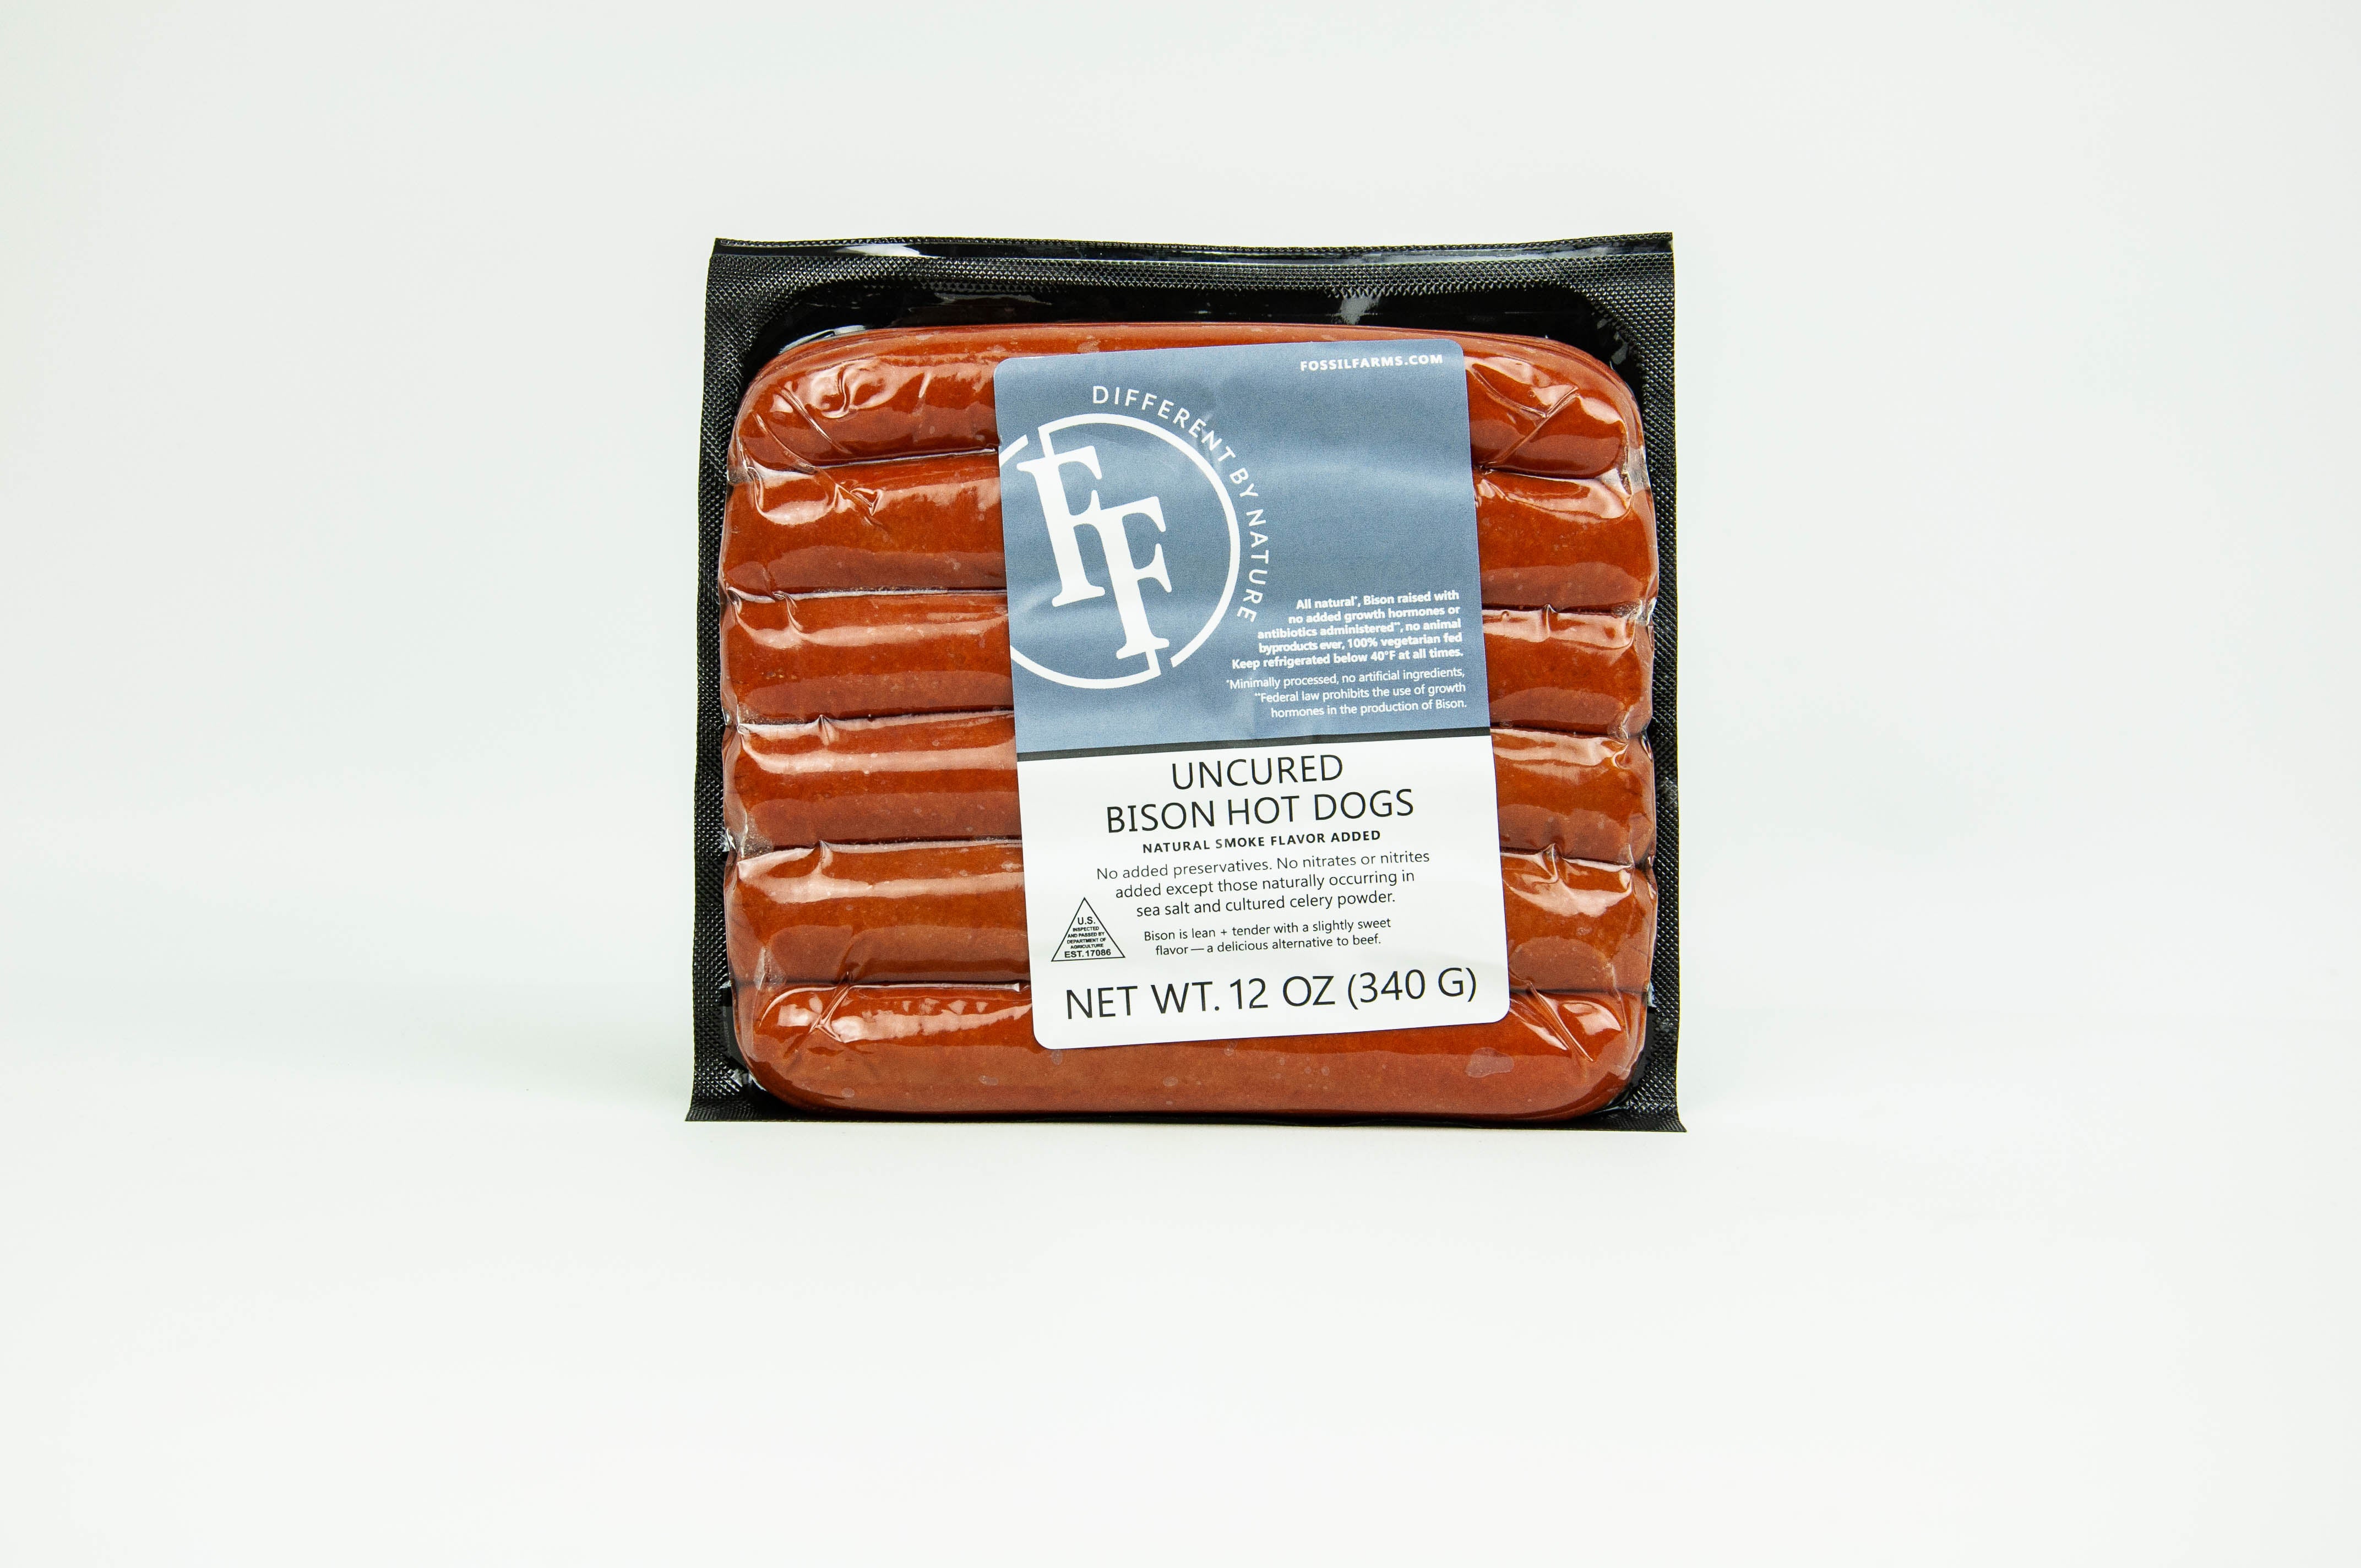 Bison Skinless Hot Dogs Packaged